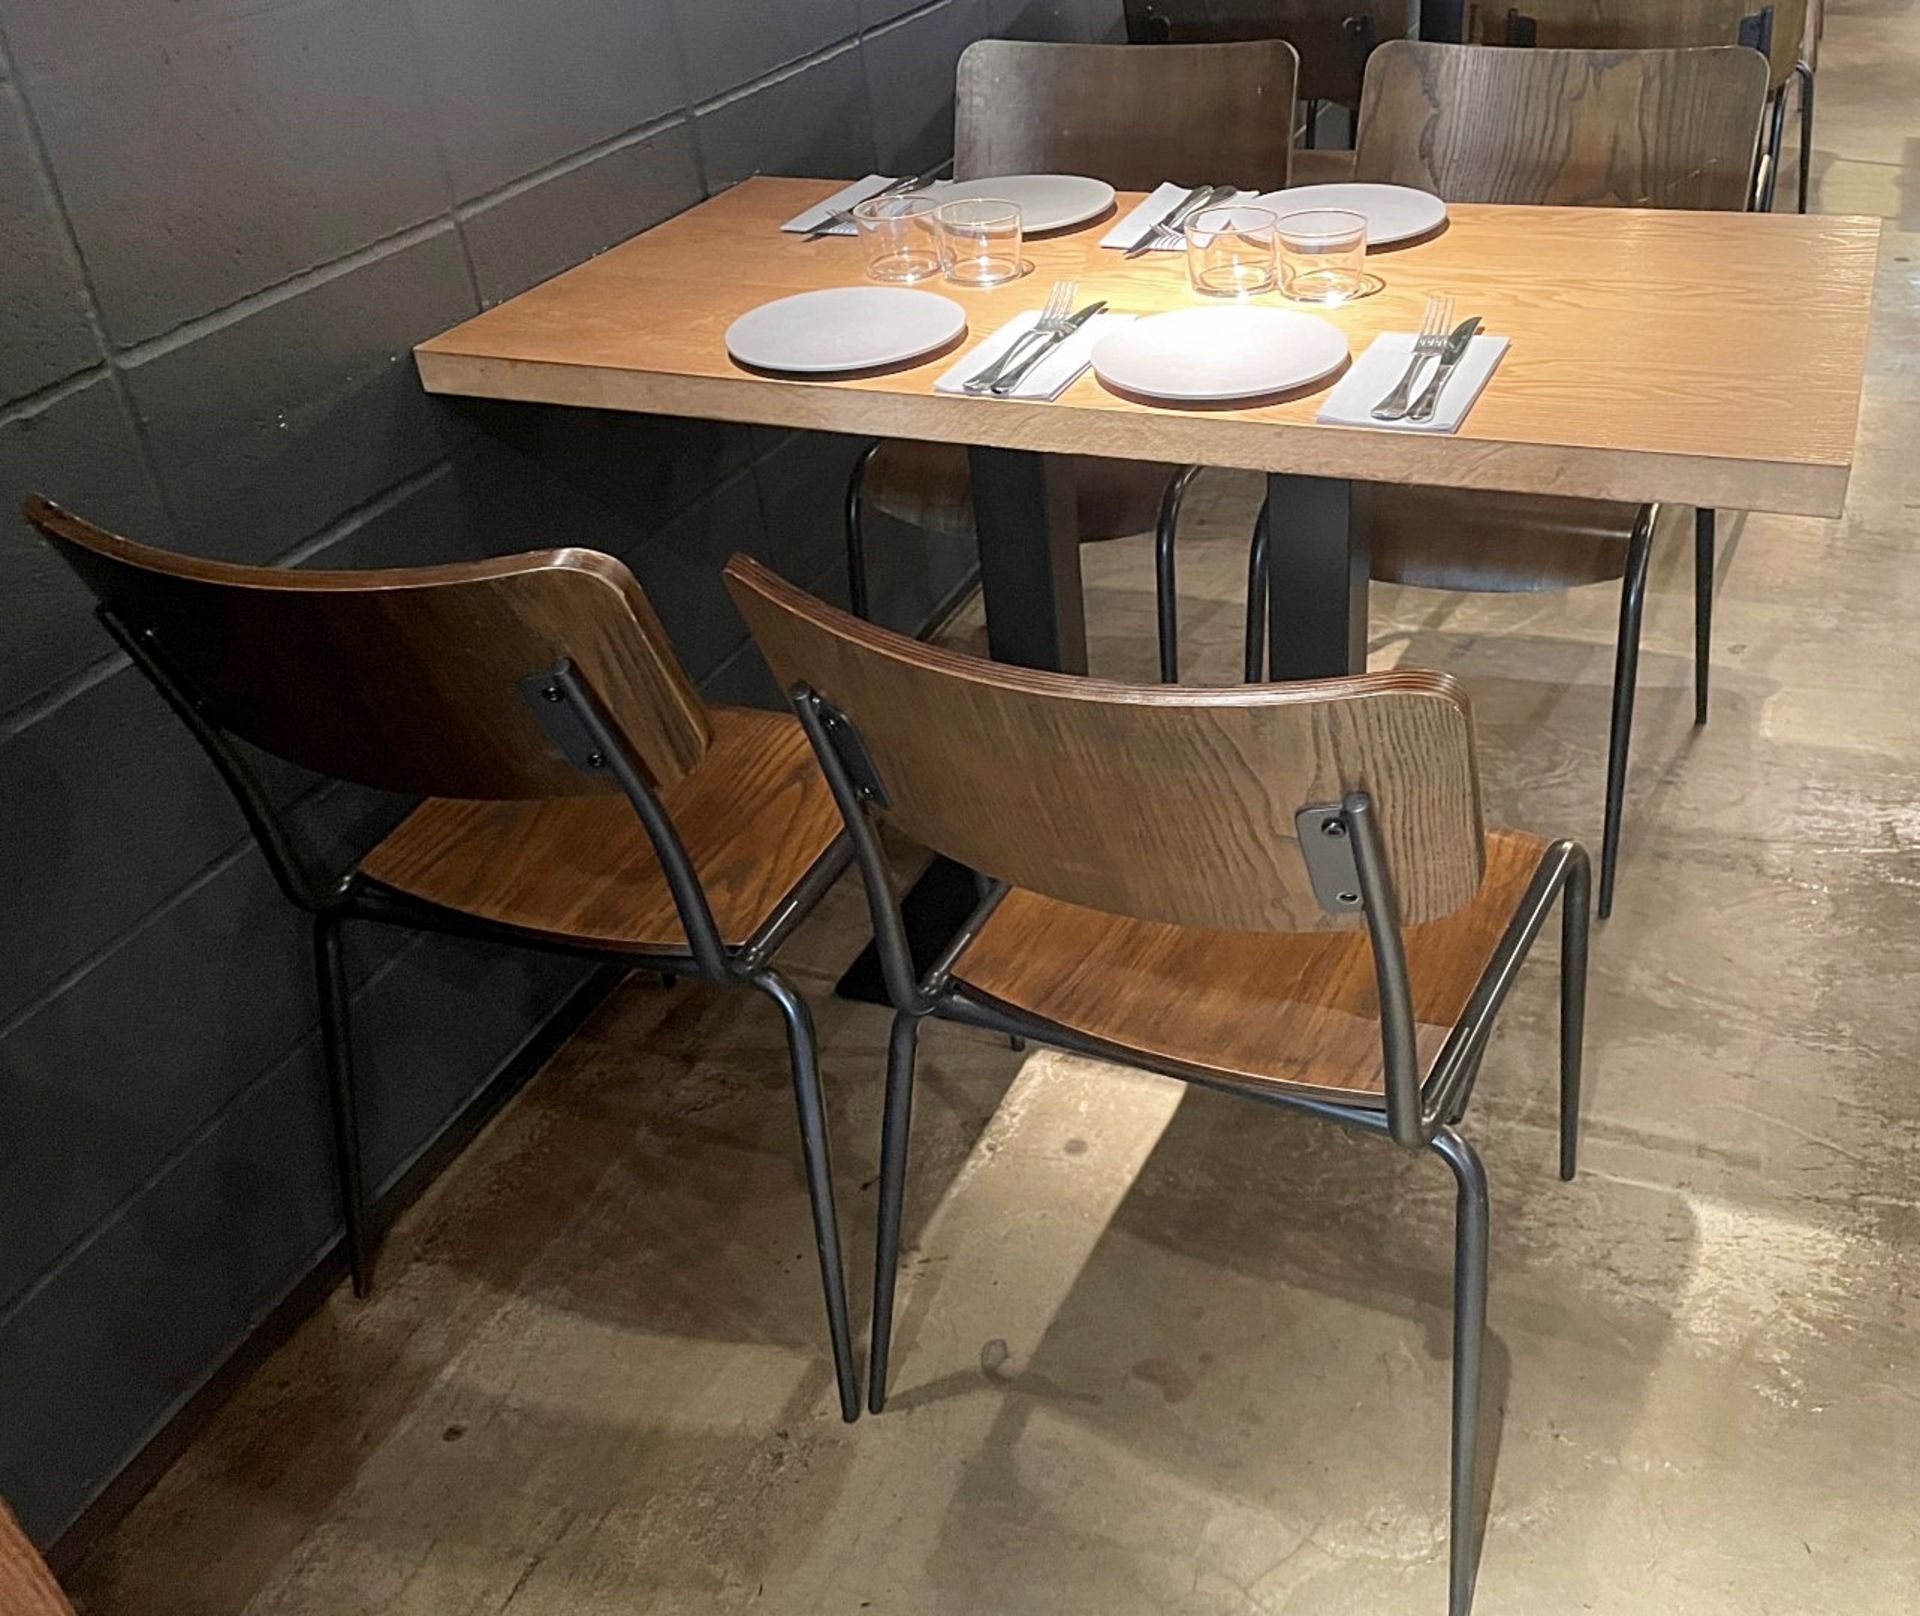 15 x Bistro Dining Chairs Featuring Wooden Back And Seats With Sturdy Metal Frames - Ref: MAN142 - - Image 3 of 8